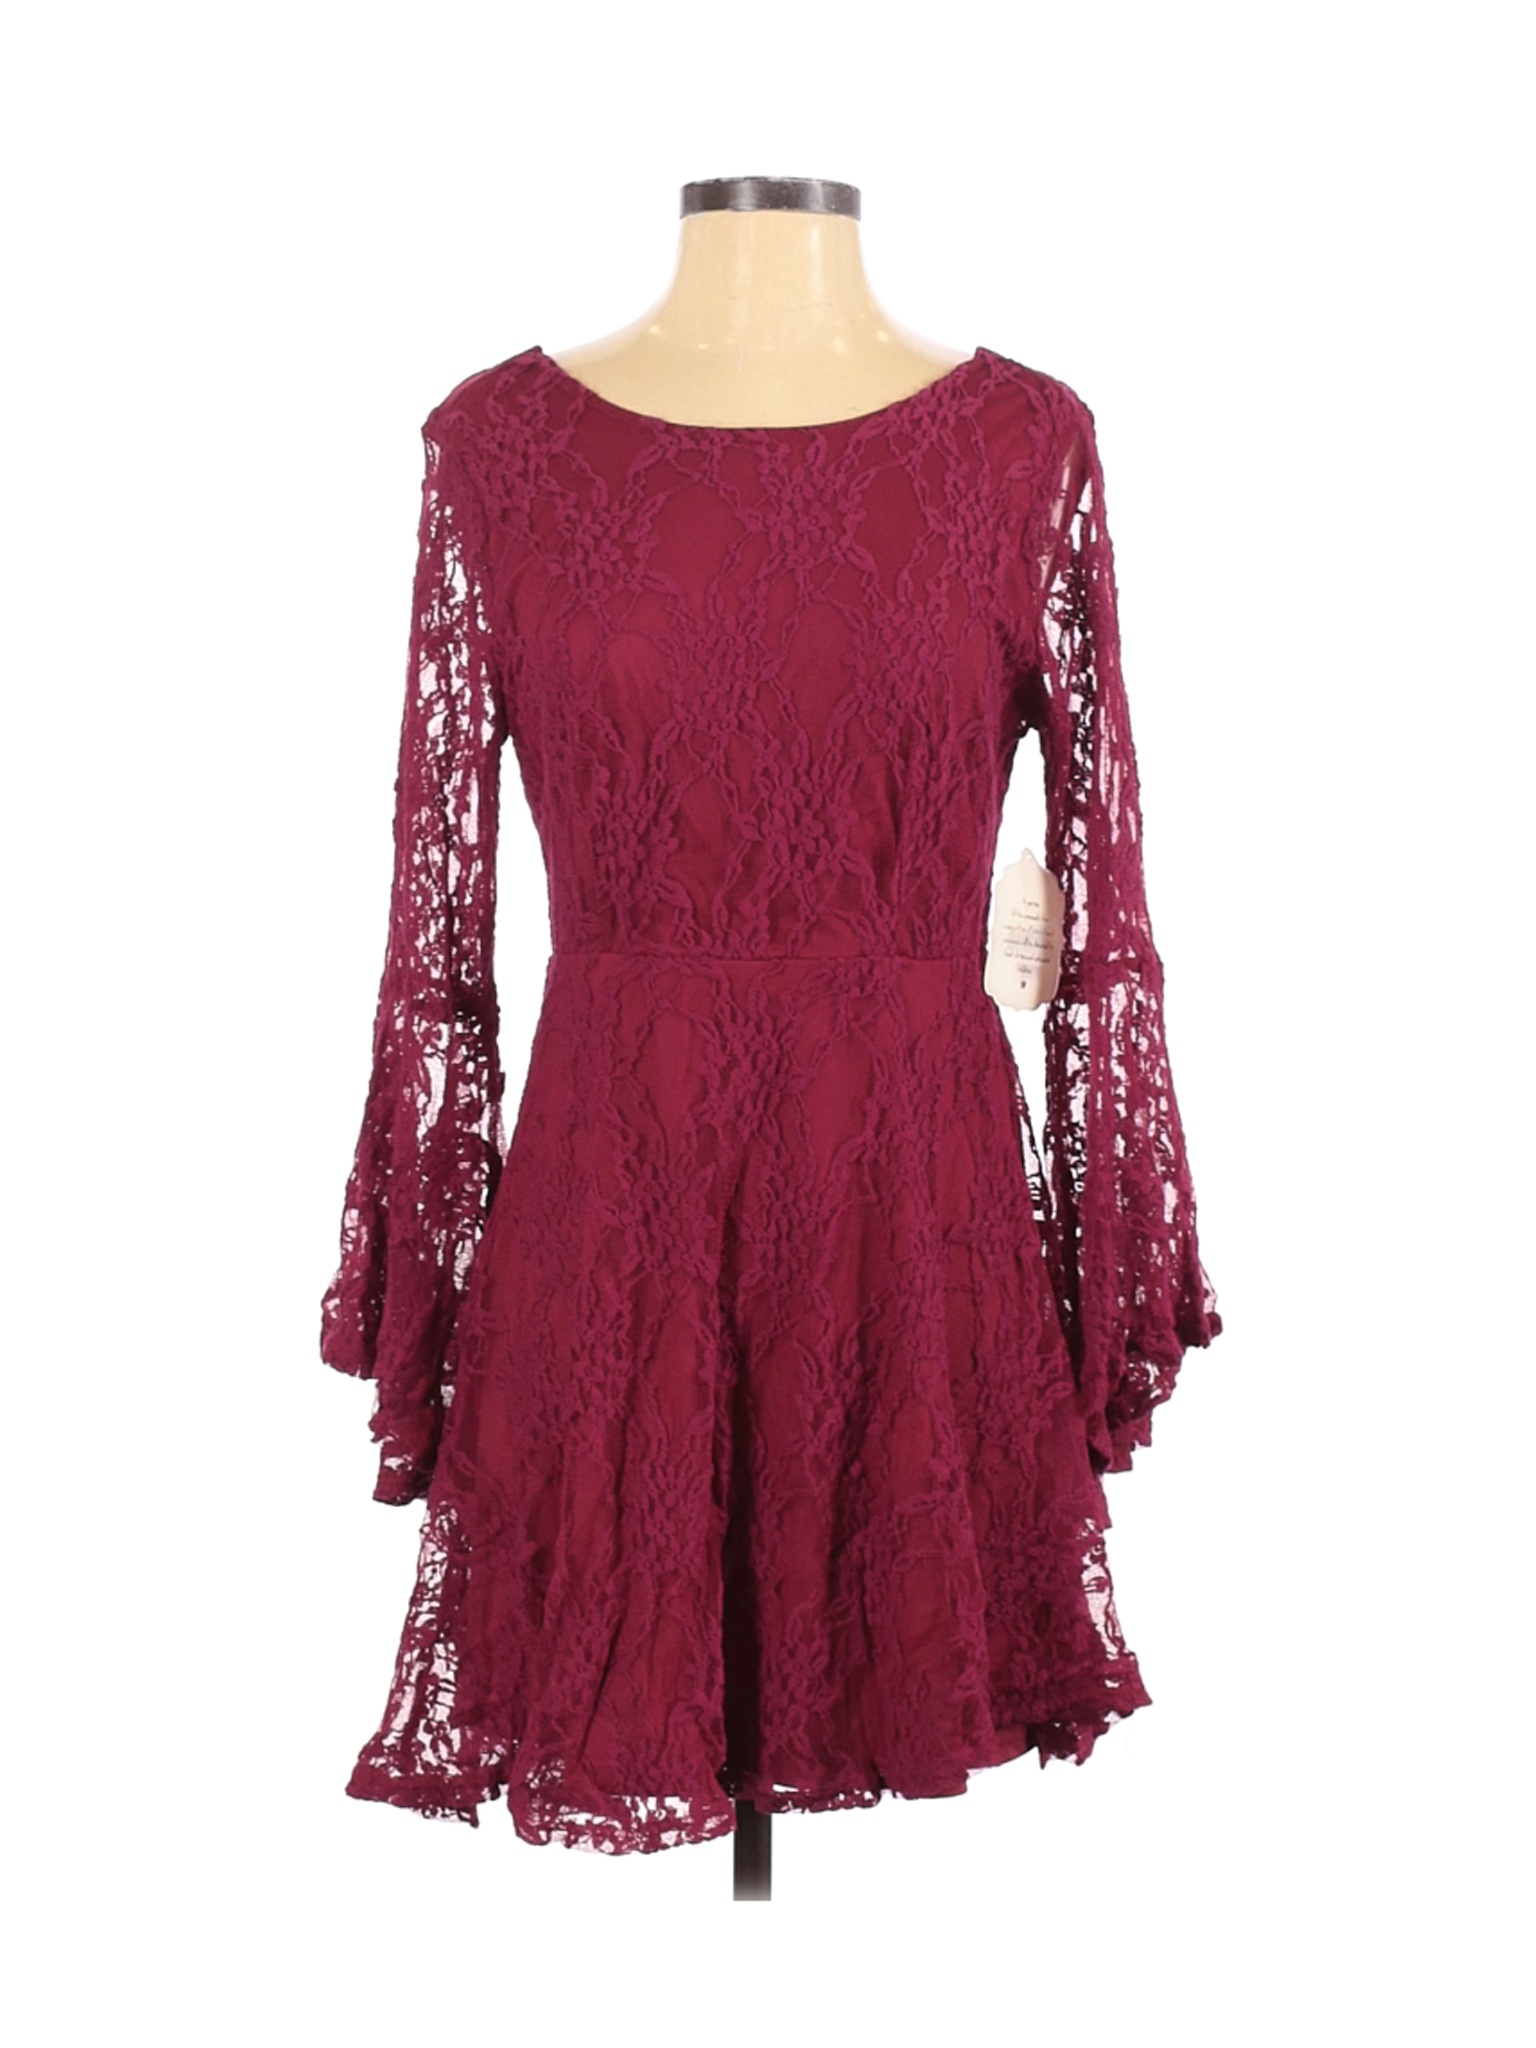 NWT Altar'd State Women Red Cocktail Dress S | eBay